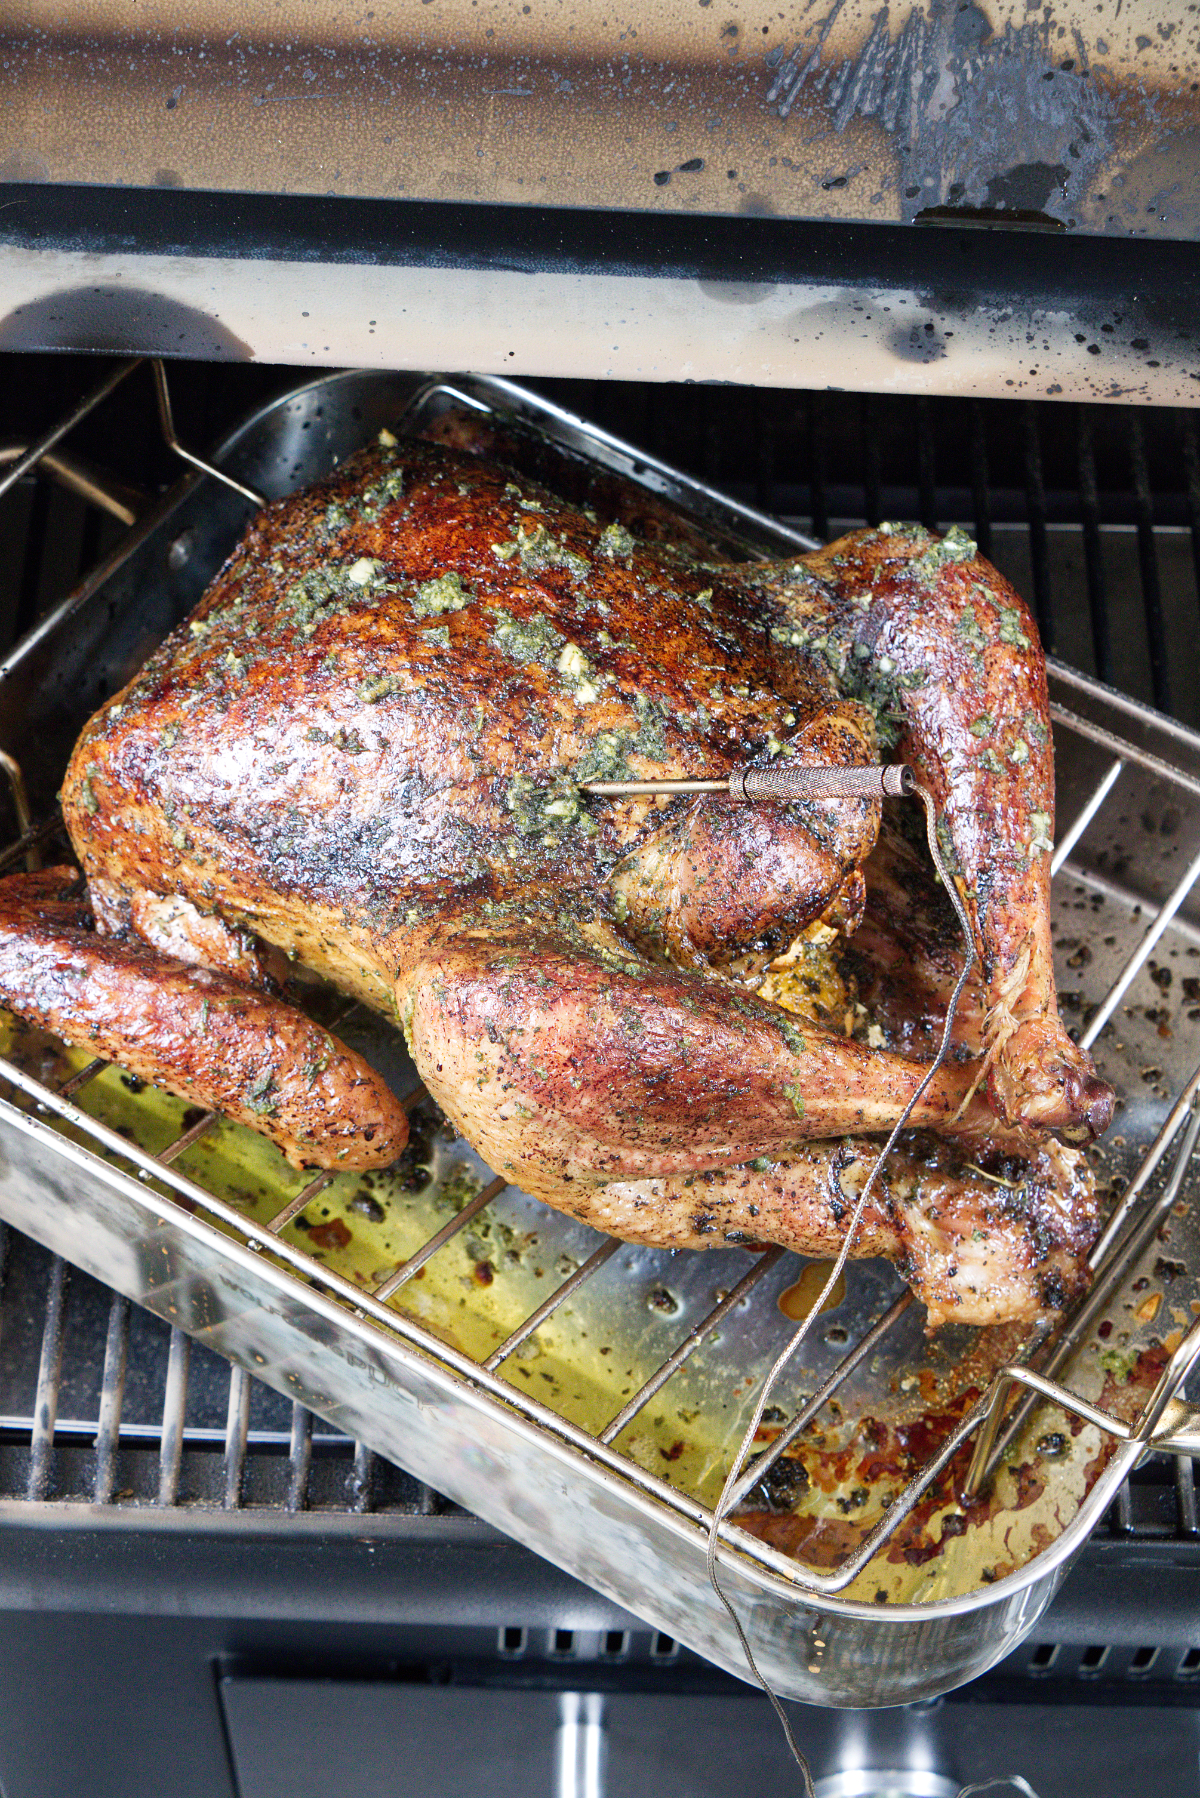 Dry brine smoked turkey on the Traeger grill, smoking in a roasting pan on the grill.